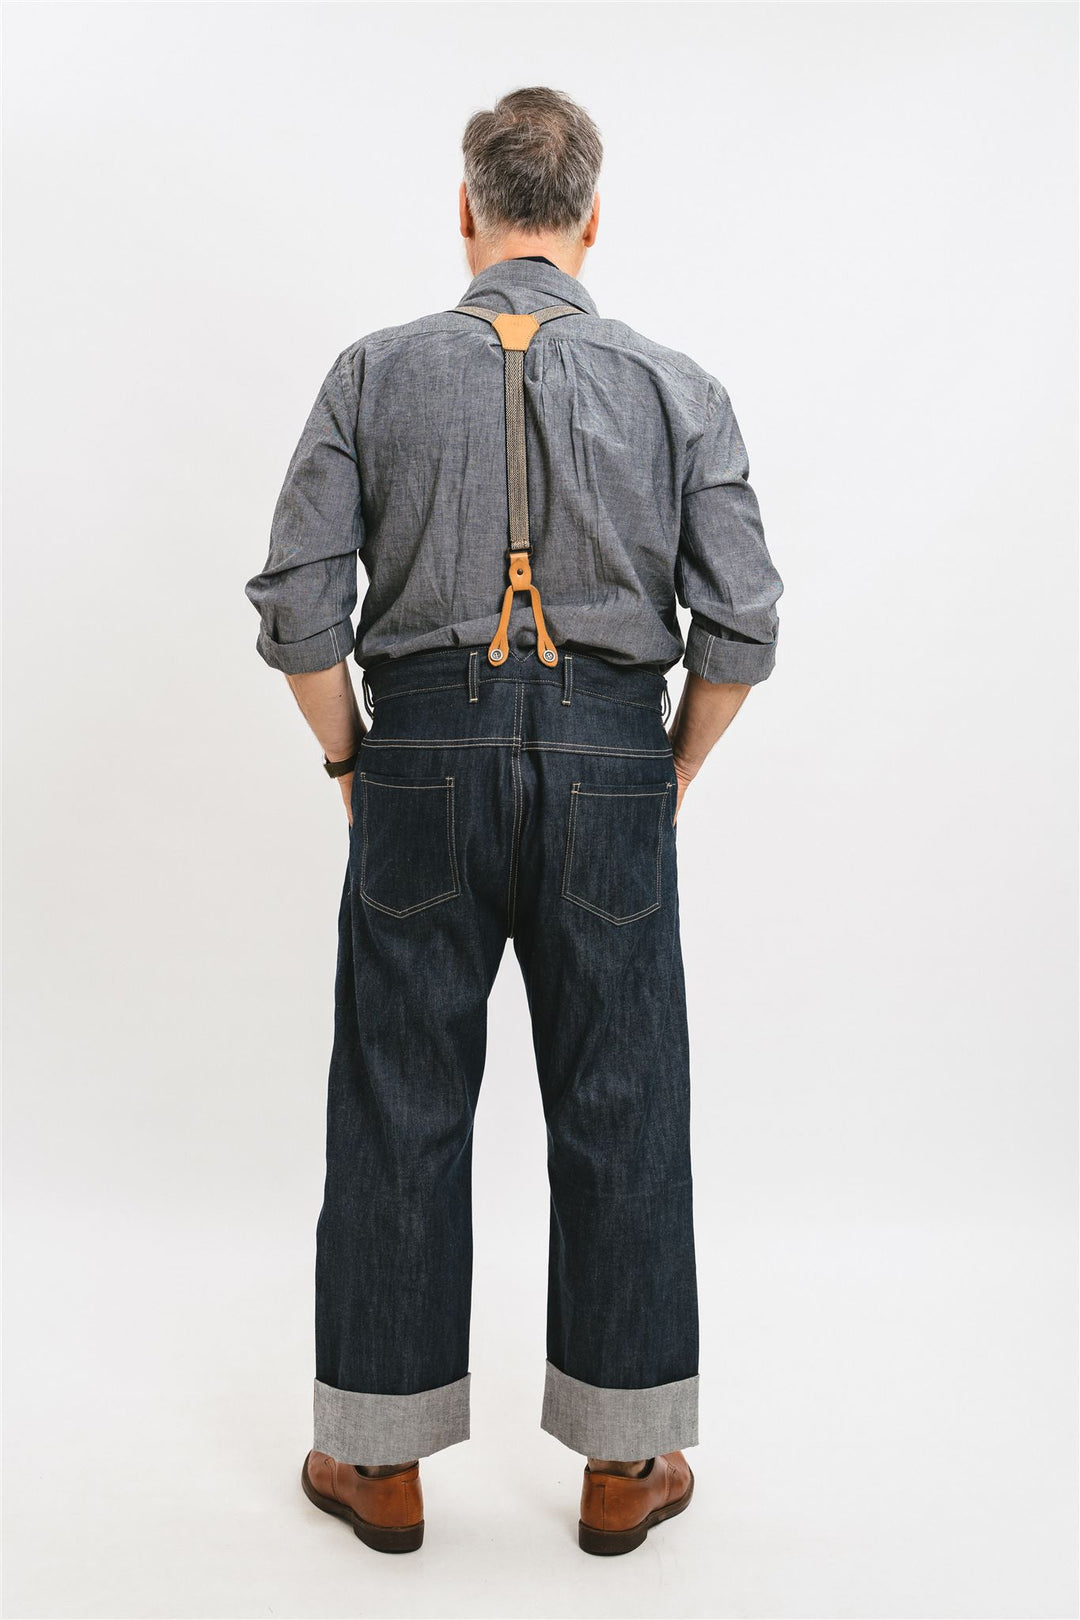 Blue and Off-white selvedge denim trousers